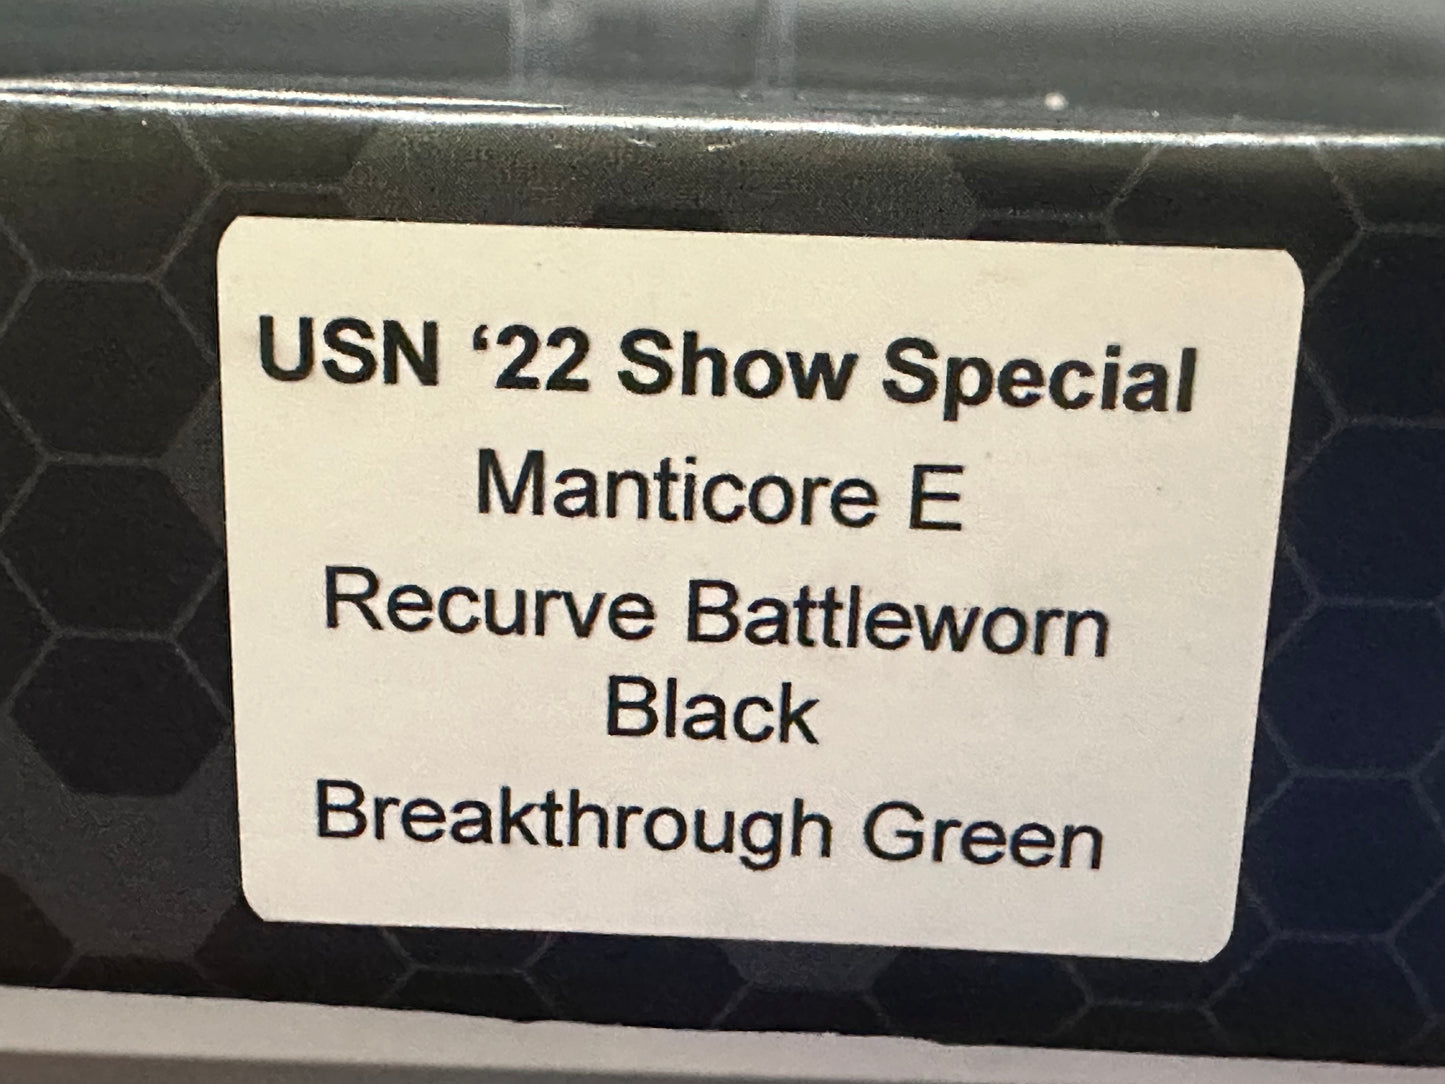 Heretic - Manticore E (2022 USN SHOW SPECIAL)